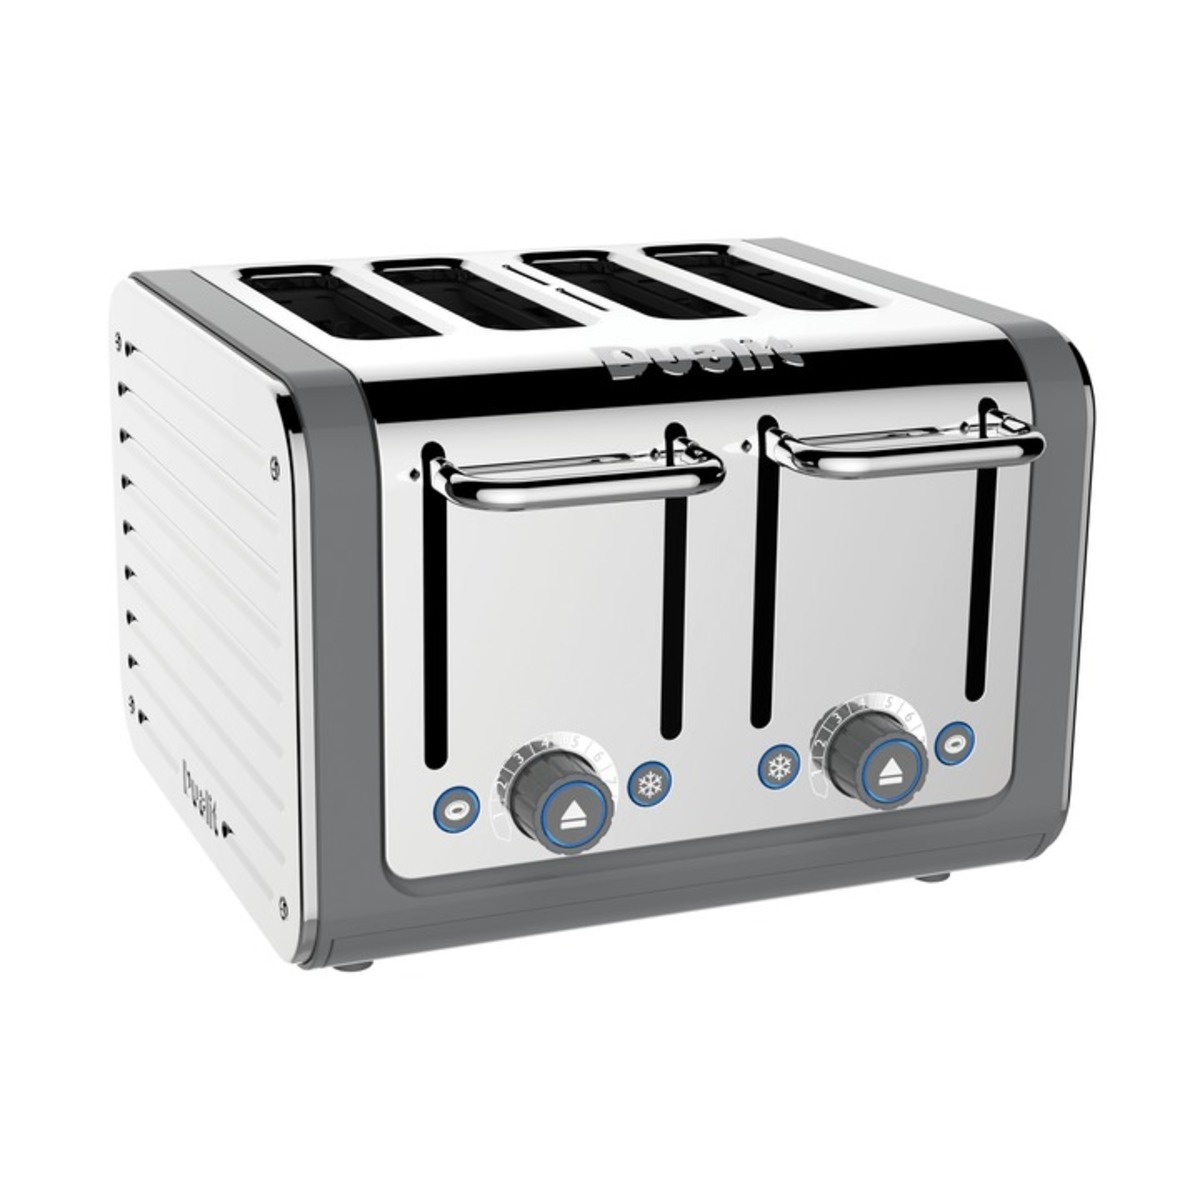 Dualit 46526 ARCHITECT 4 Slot Toaster, Grey/Stainless Steel